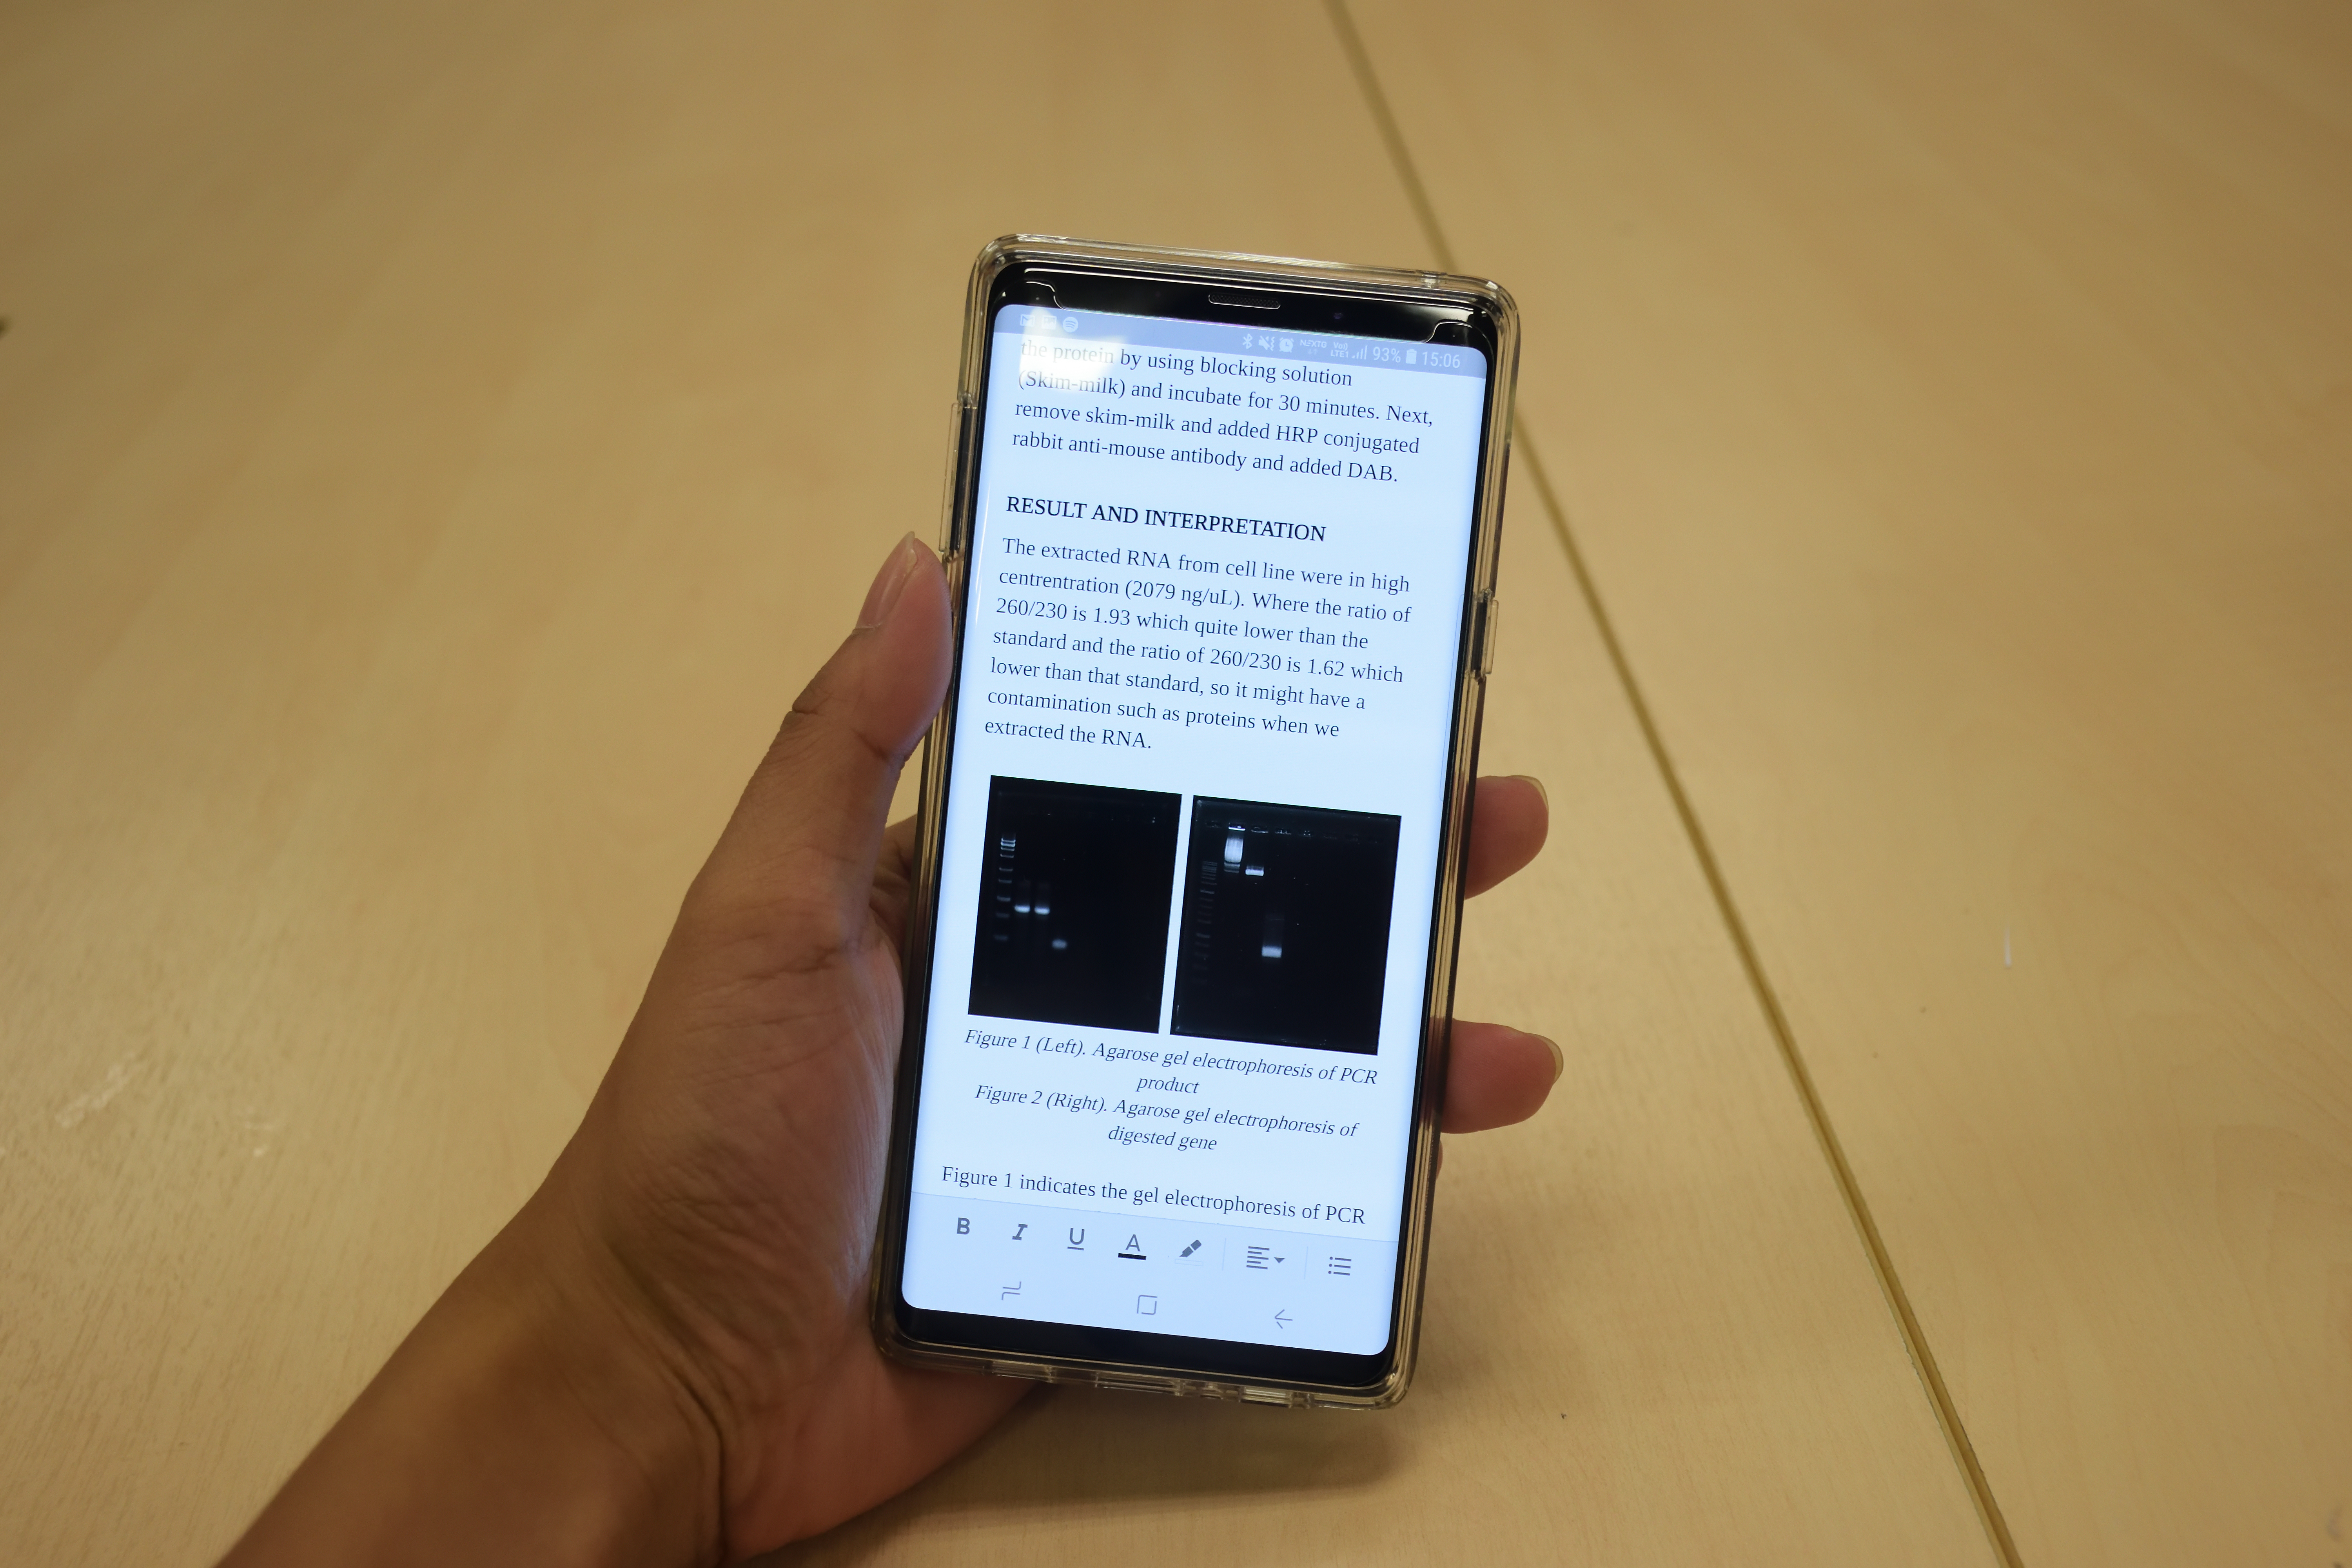 Samsung Galaxy Note 9 with Google Docs